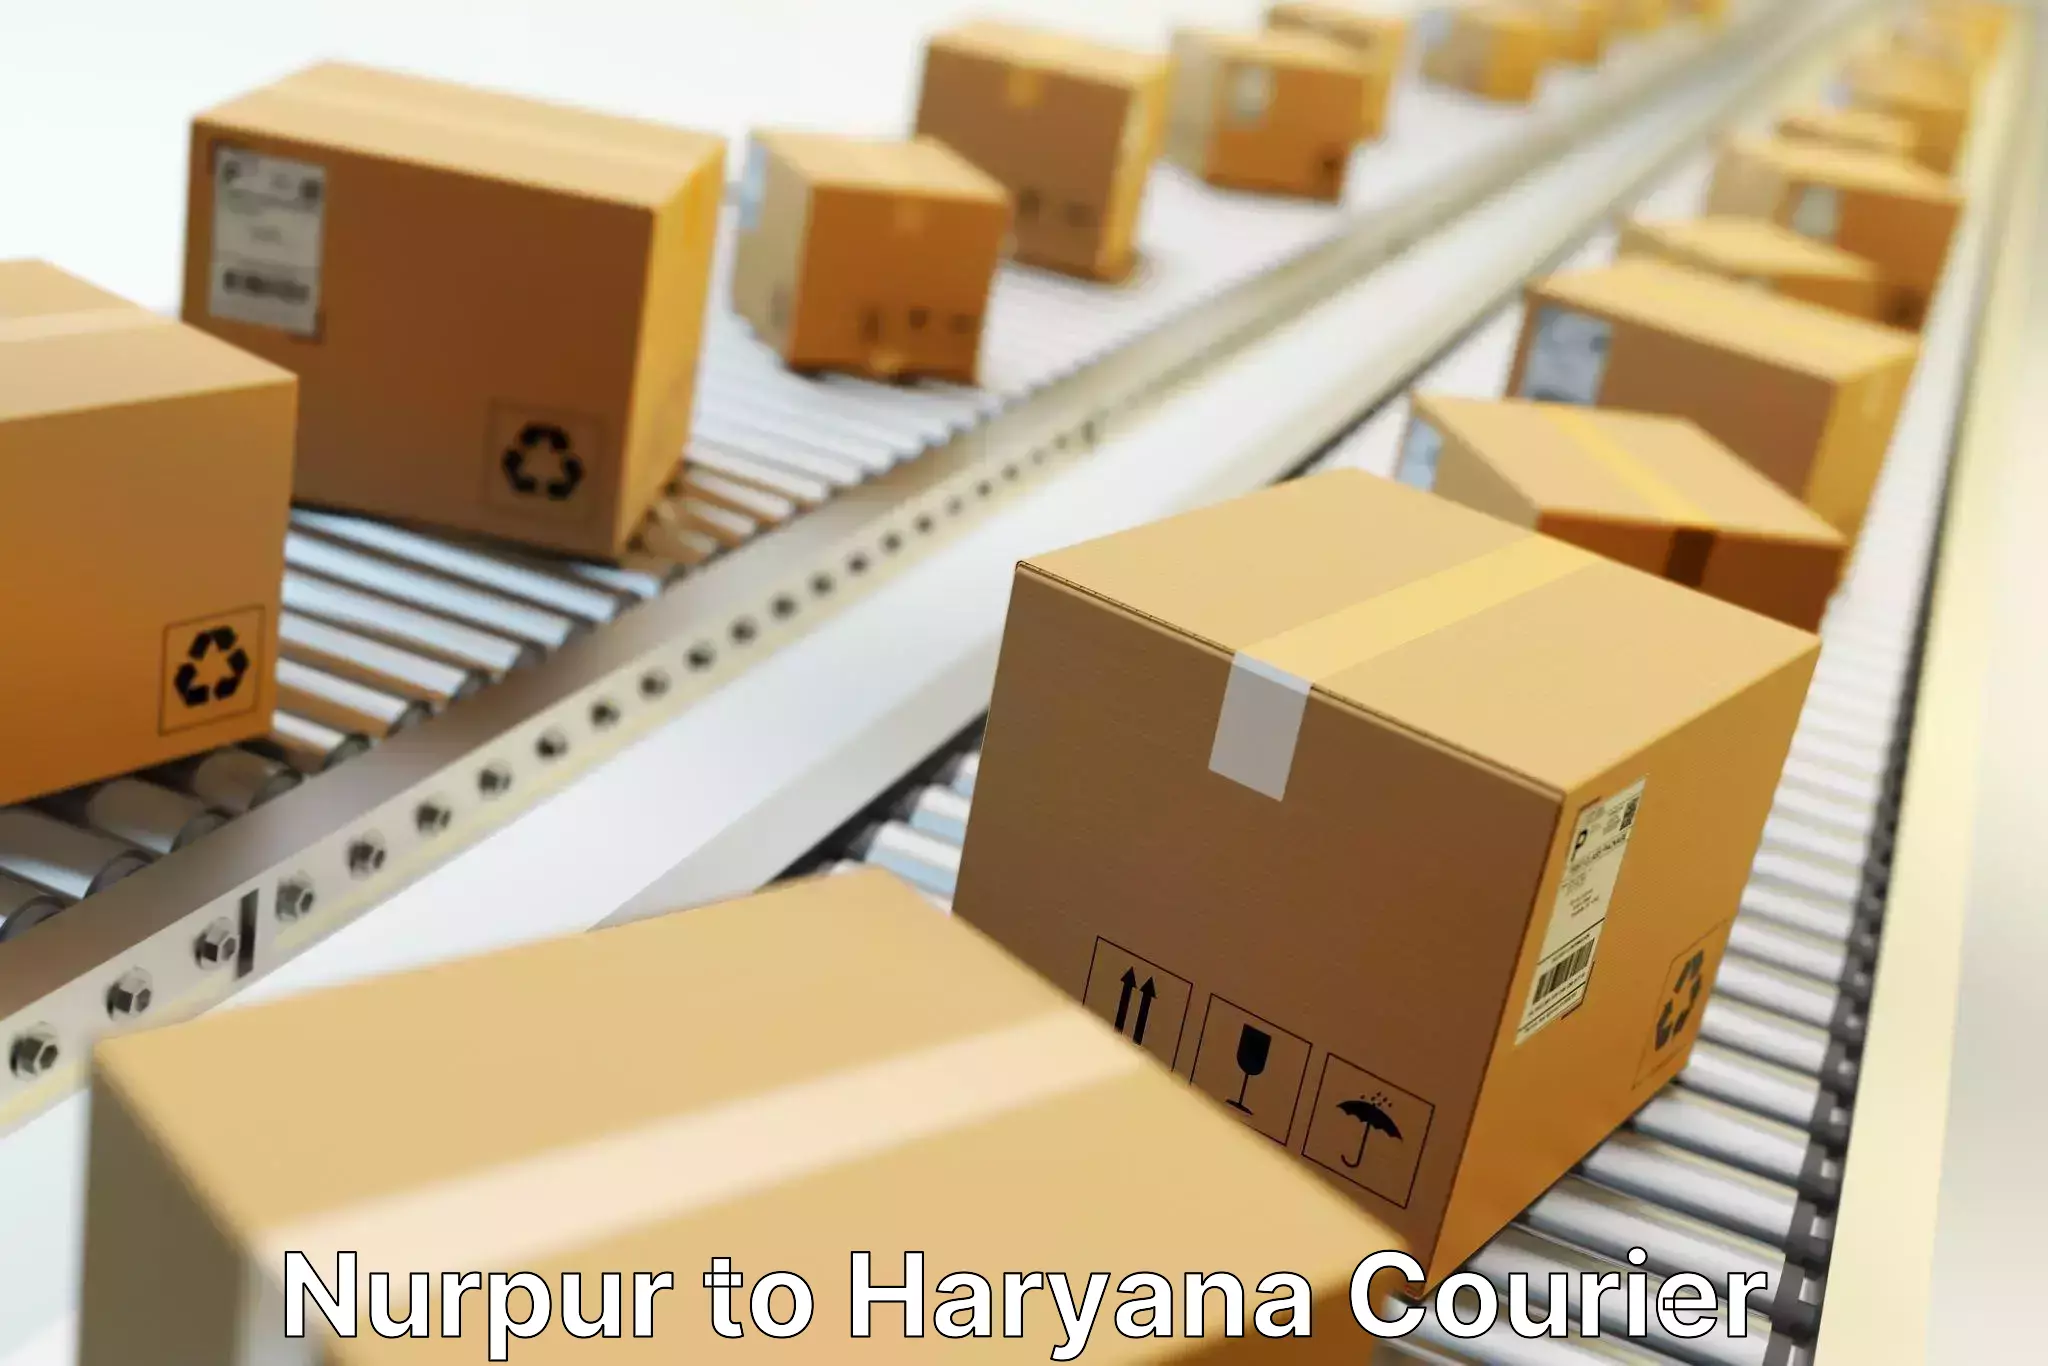 Next-day delivery options in Nurpur to Panchkula